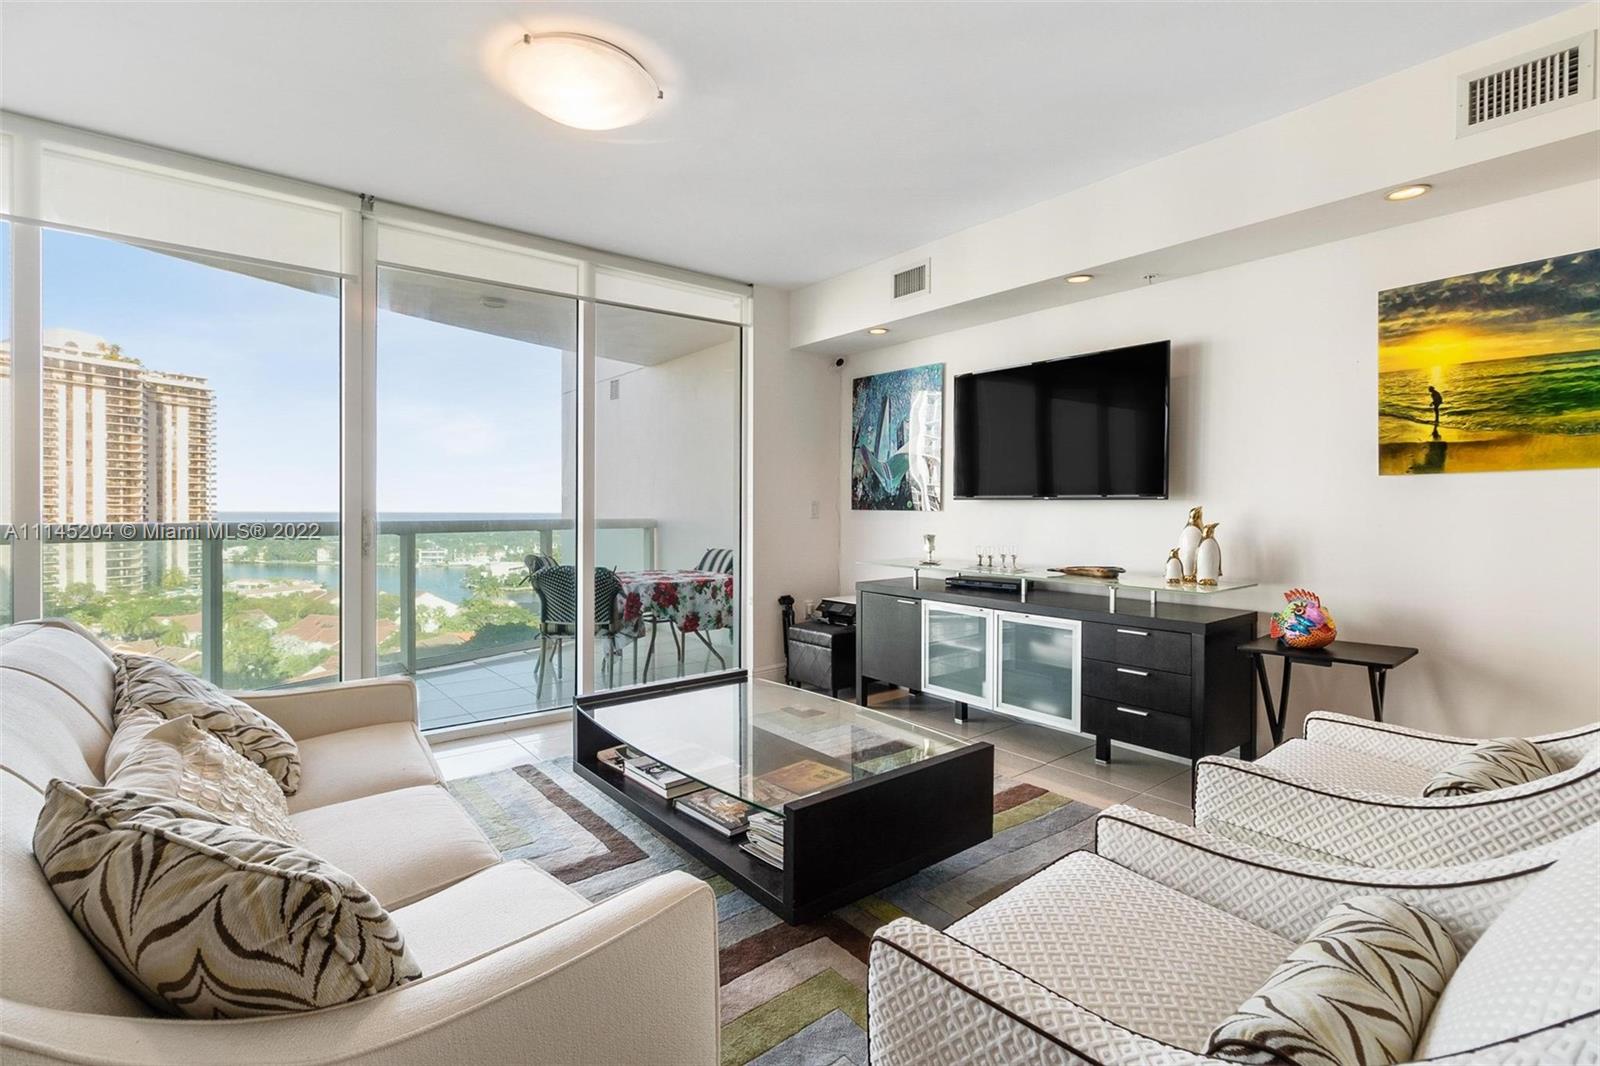 Spectacular unit at The Parc at Turnberry in the heart of Aventura. *INCLUDED * - 2 parking spaces. Elevator opens directly into a private foyer. Breathtaking ocean views from this 2 bedroom plus den/office with custom built-ins for plenty of extra storage. Eat-in kitchen w/gorgeous wood cabinetry. Amenities include Pool, Kids pool, Jacuzzi, Gym, Spa and treatment room, Playground, Billiard room, Party Room and Shabbat Elevator. Walk to the Aventura Golf Circle, Houses of Worship and Aventura Mall.